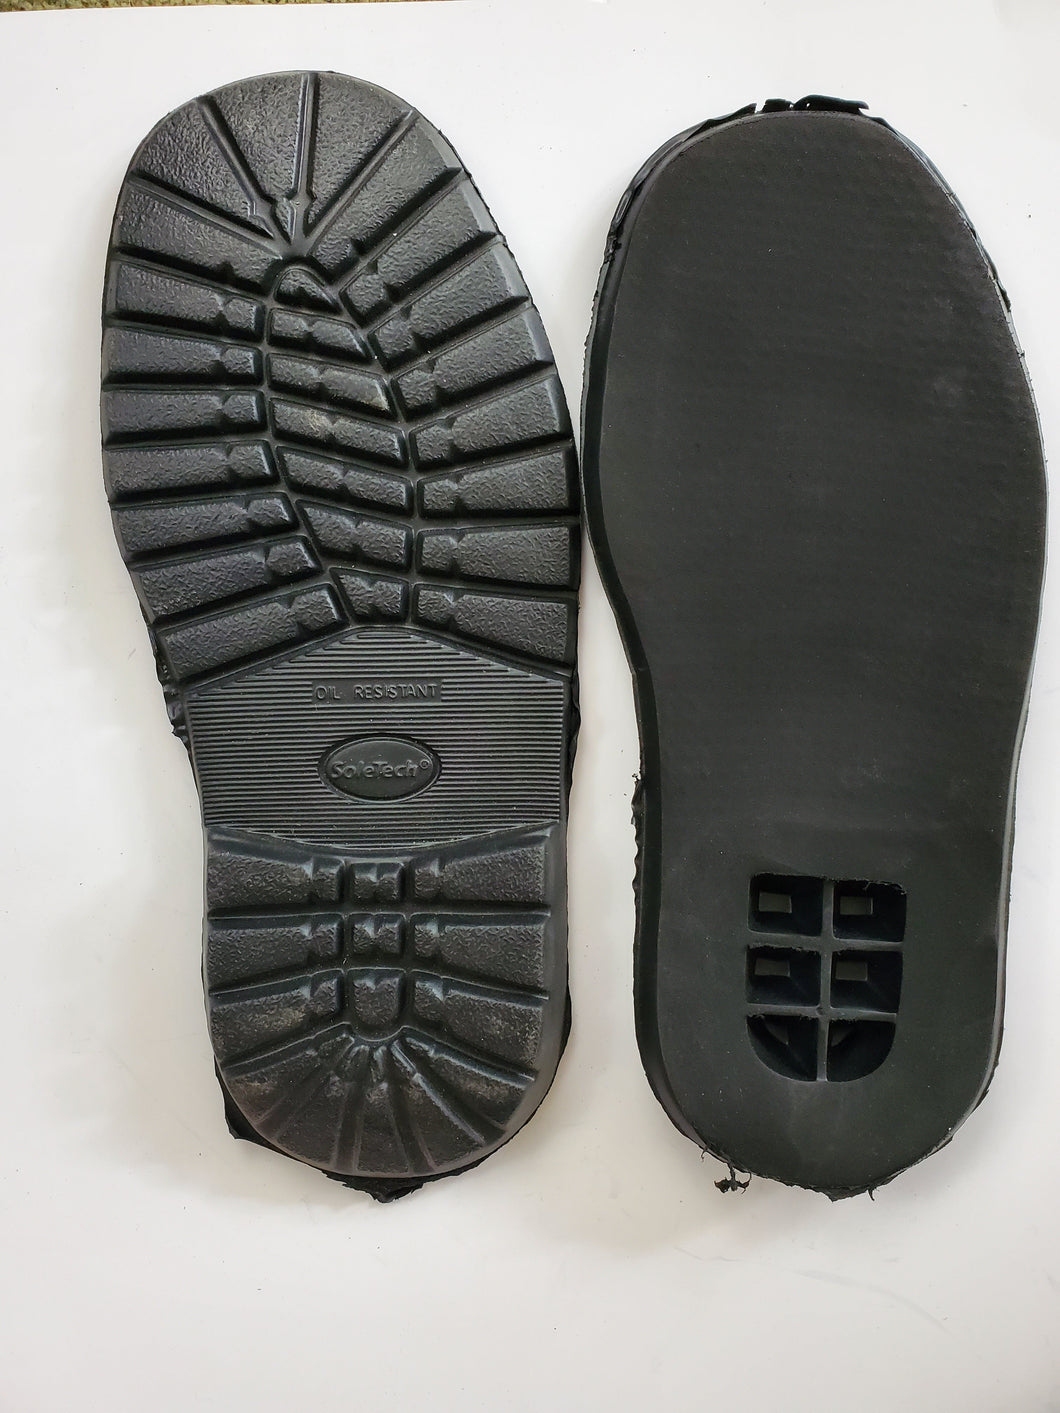 Soletech outer soles  Size 20